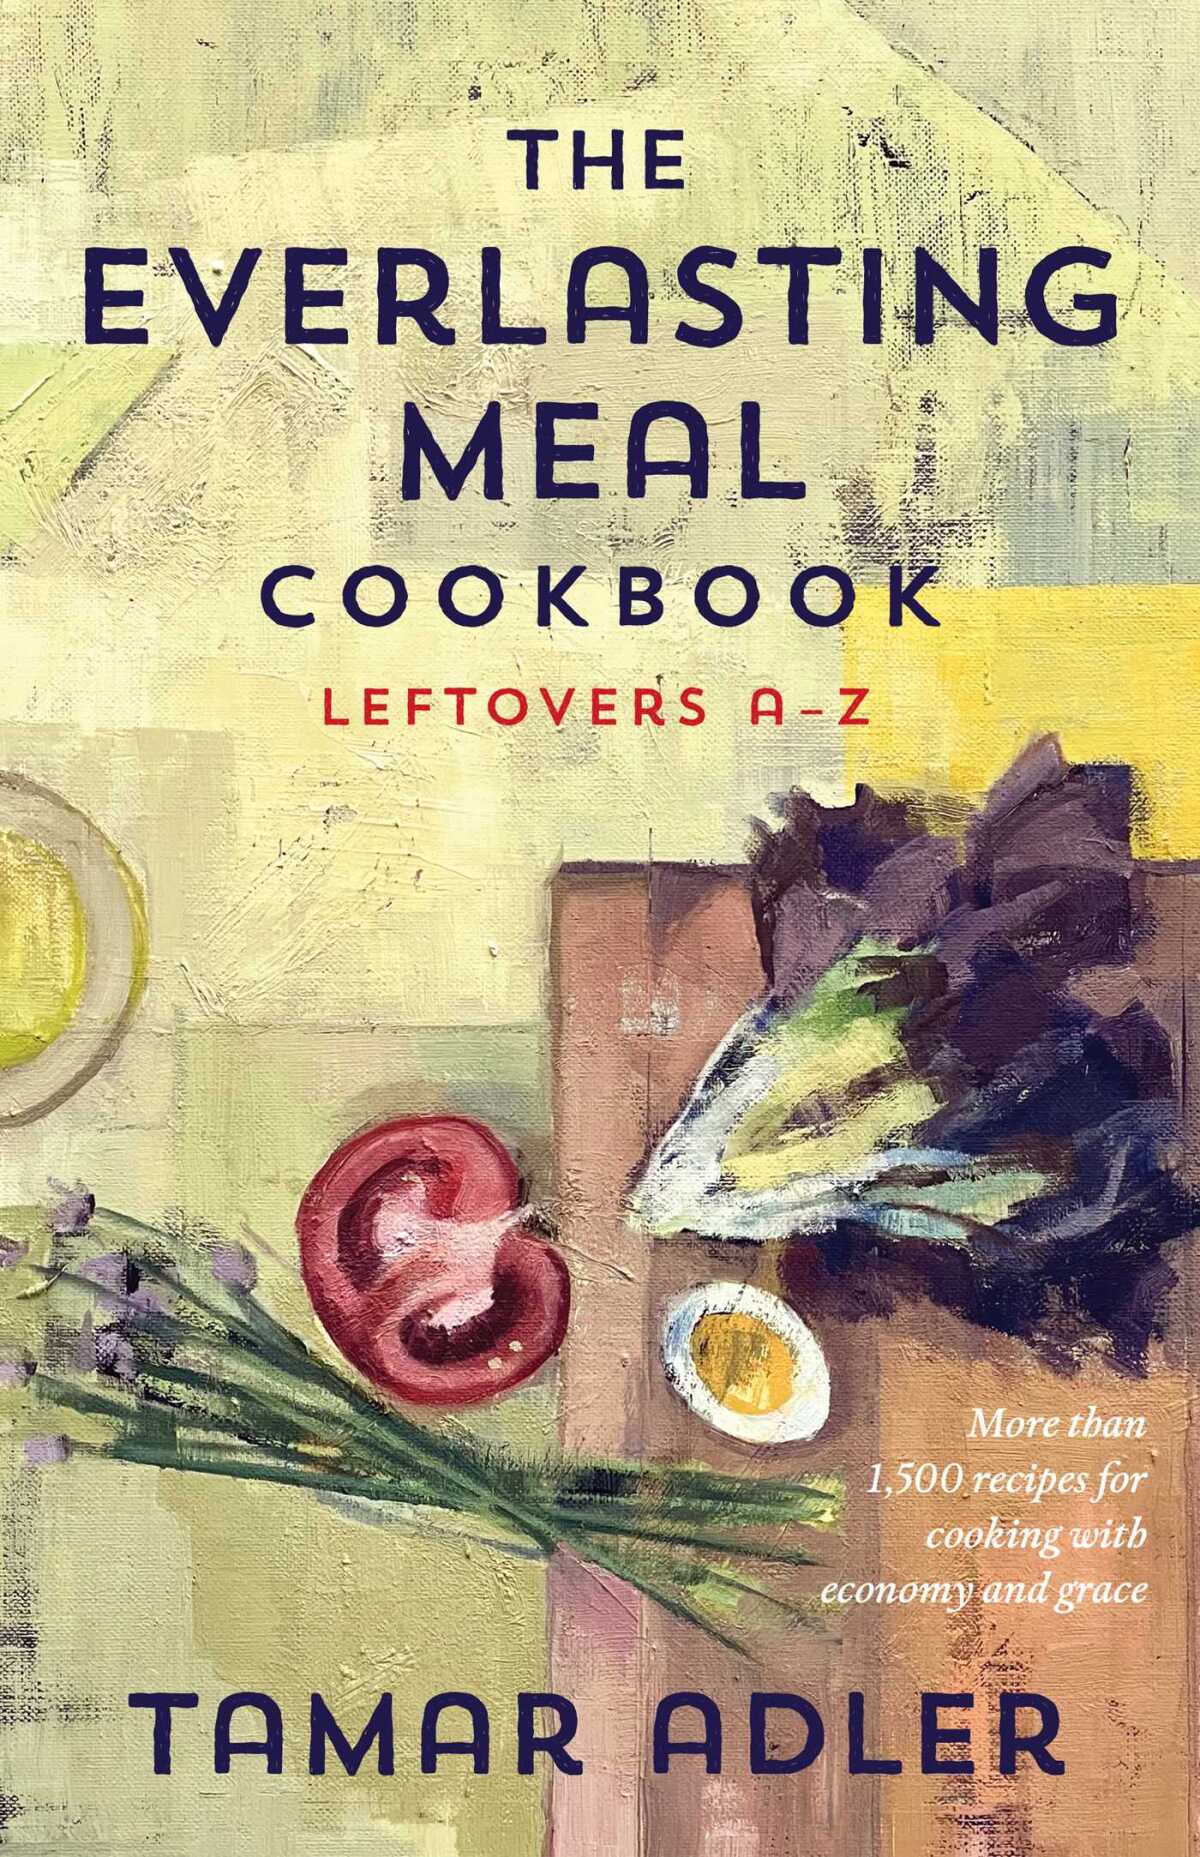 Cover of "The Everlasting Meal Cookbook" from Tamar Adler